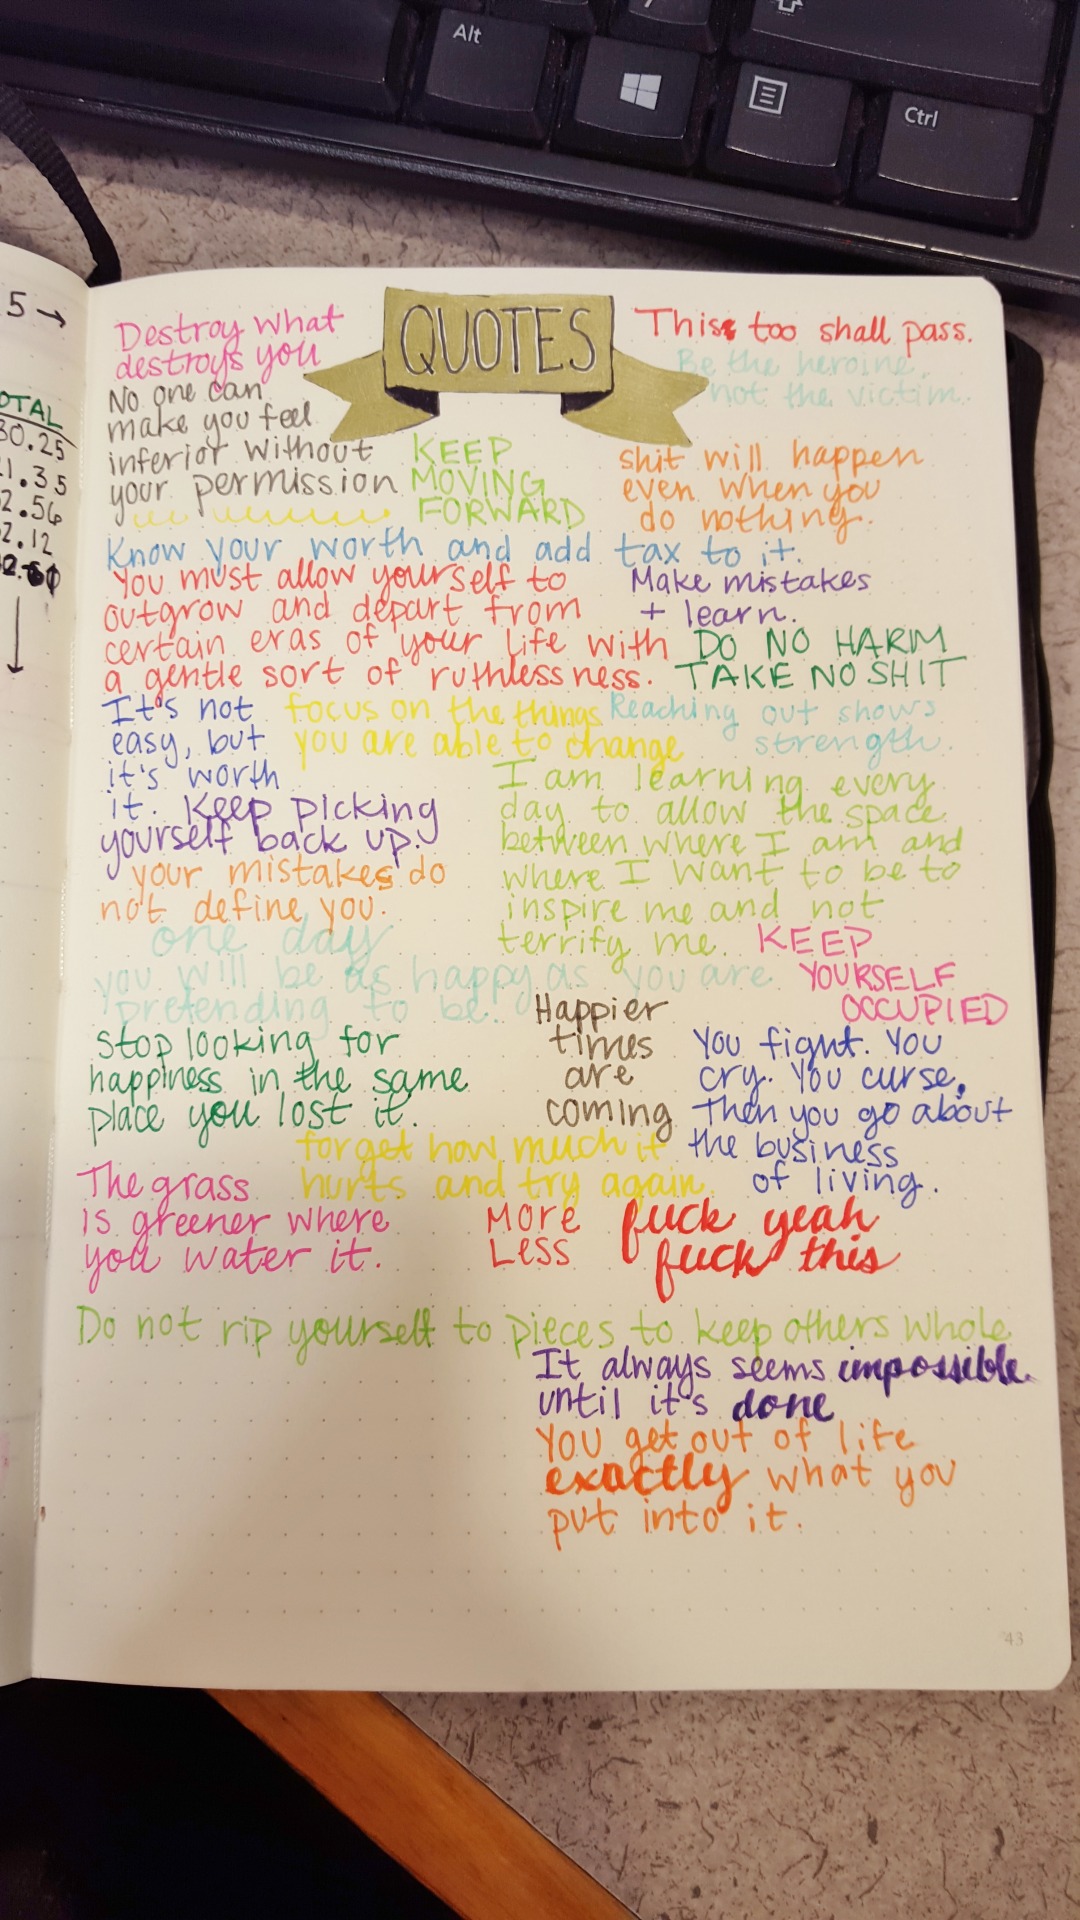 Betsy talks about makeup — my bullet journal